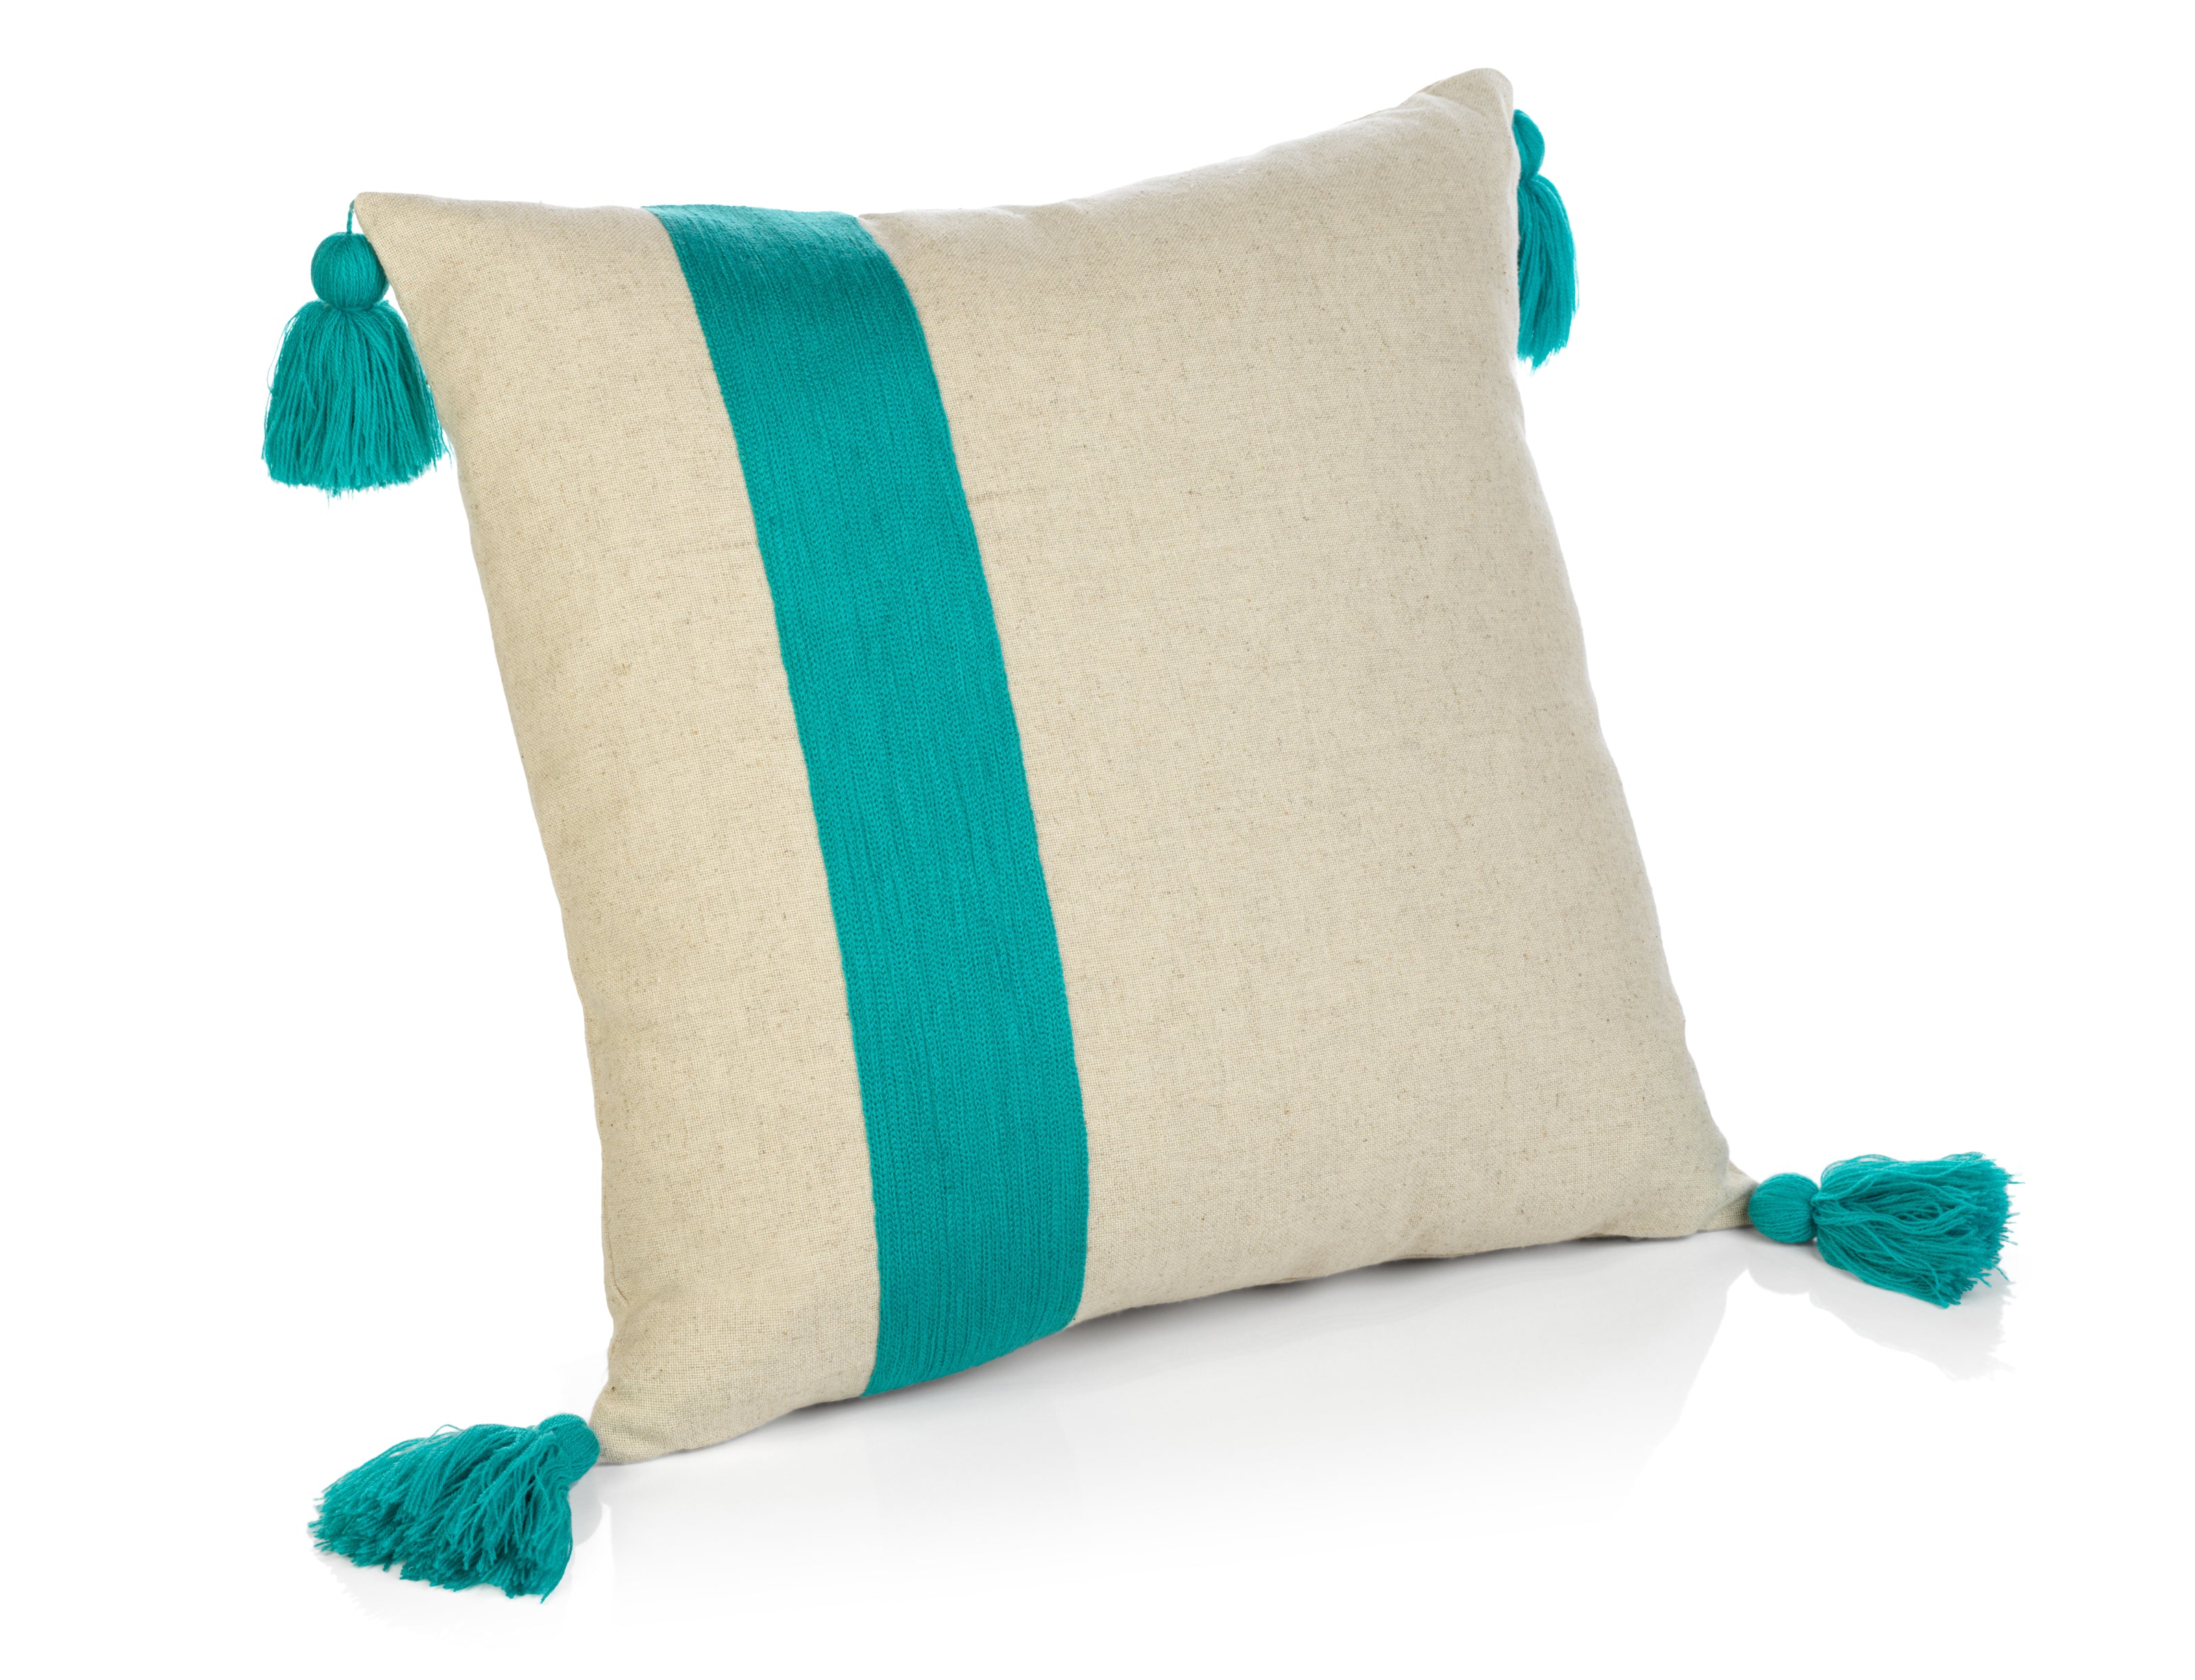 Polignano Embroidered Throw Pillow w/Tassels - Azure - CARLYLE AVENUE